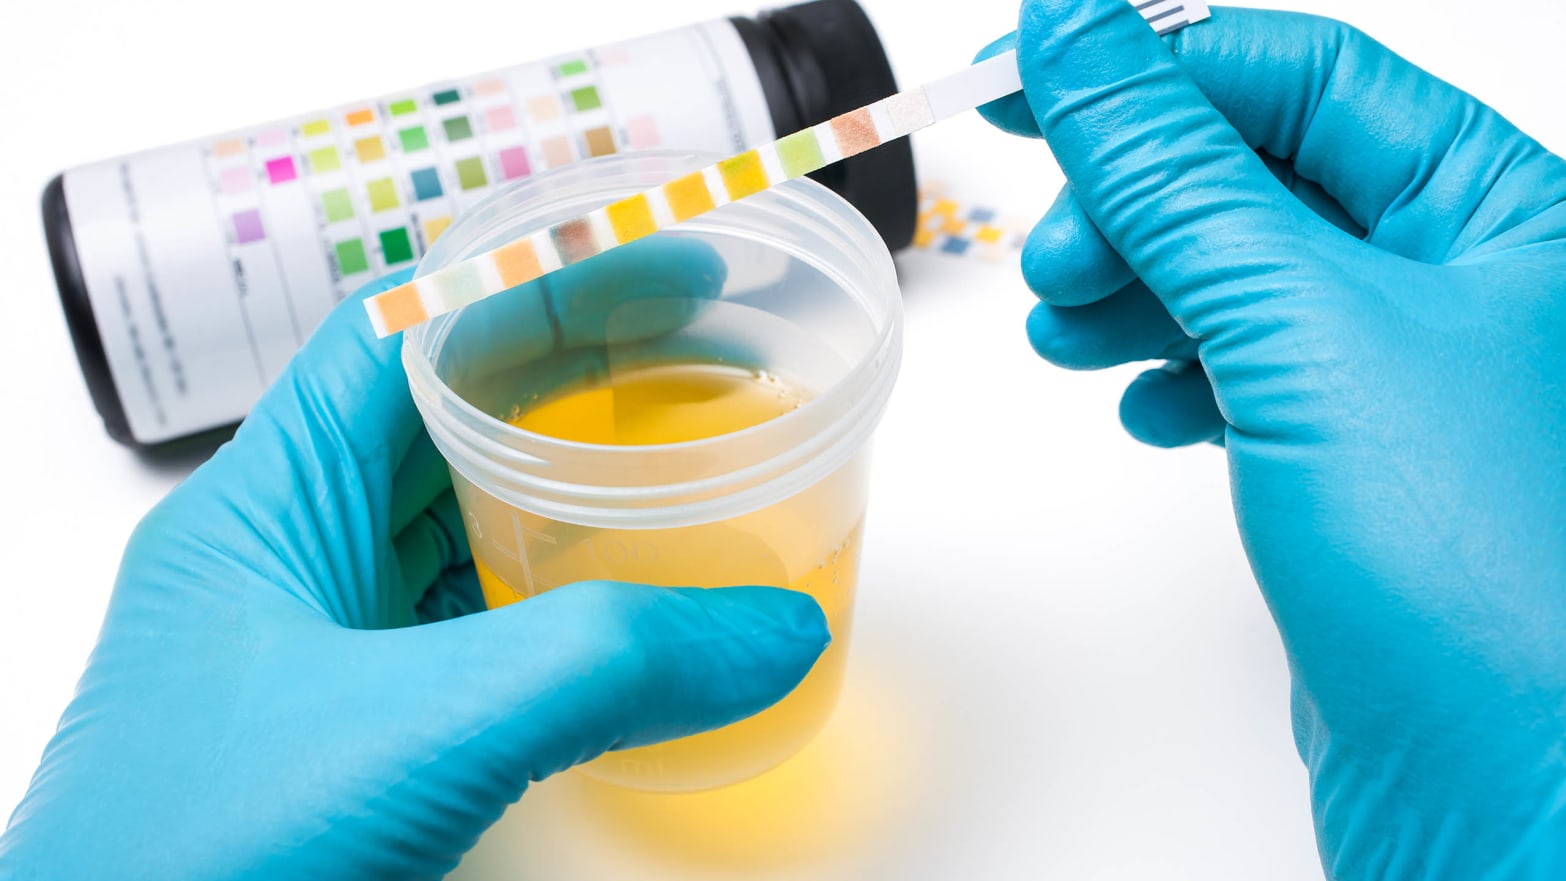 urinary tract infection uti image of blue hand glove holding urine sample with colored paper